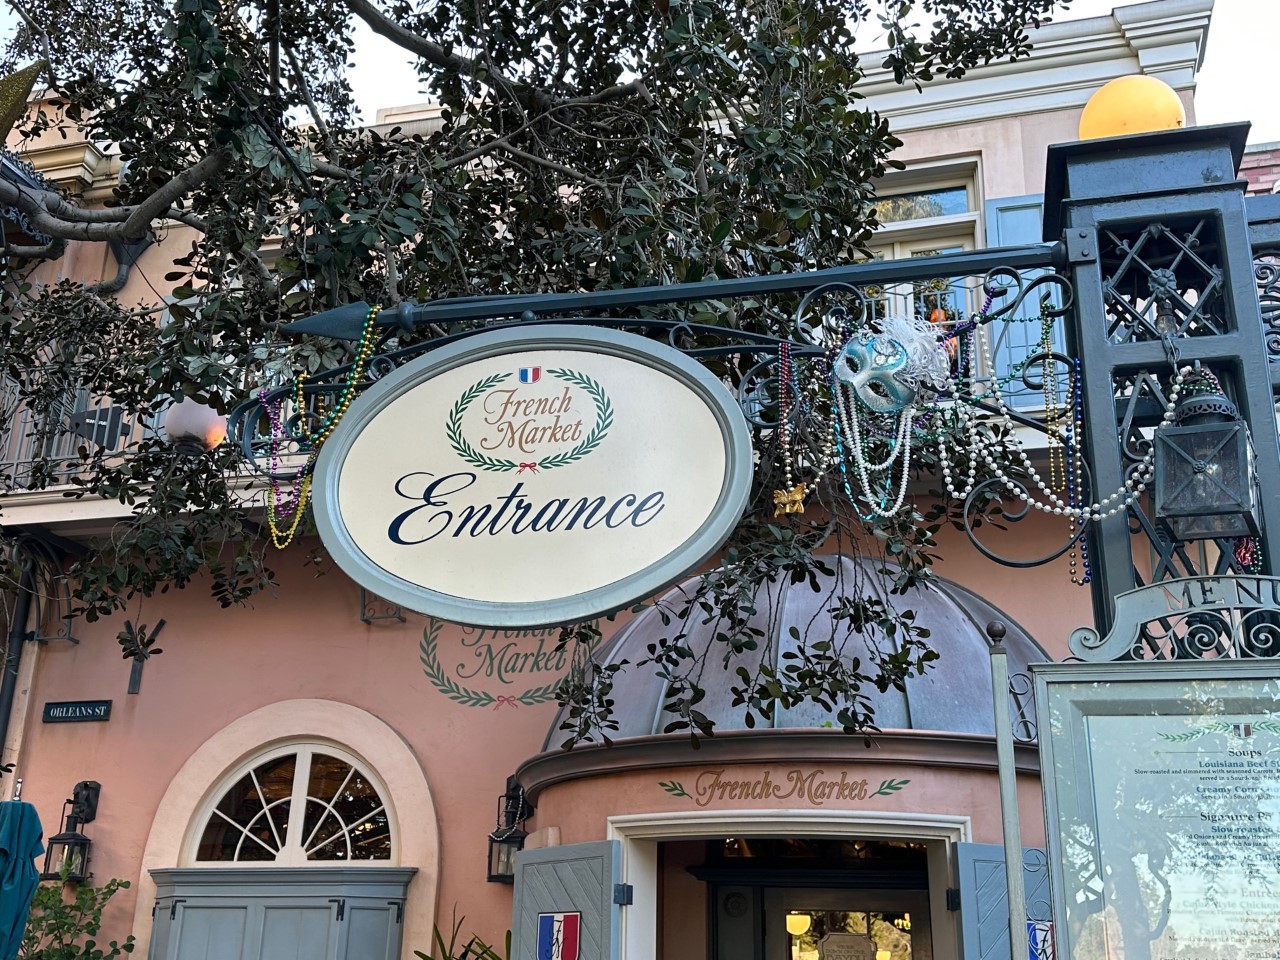 French Market at Disneyland is now closed to make way for Tiana’s Palace